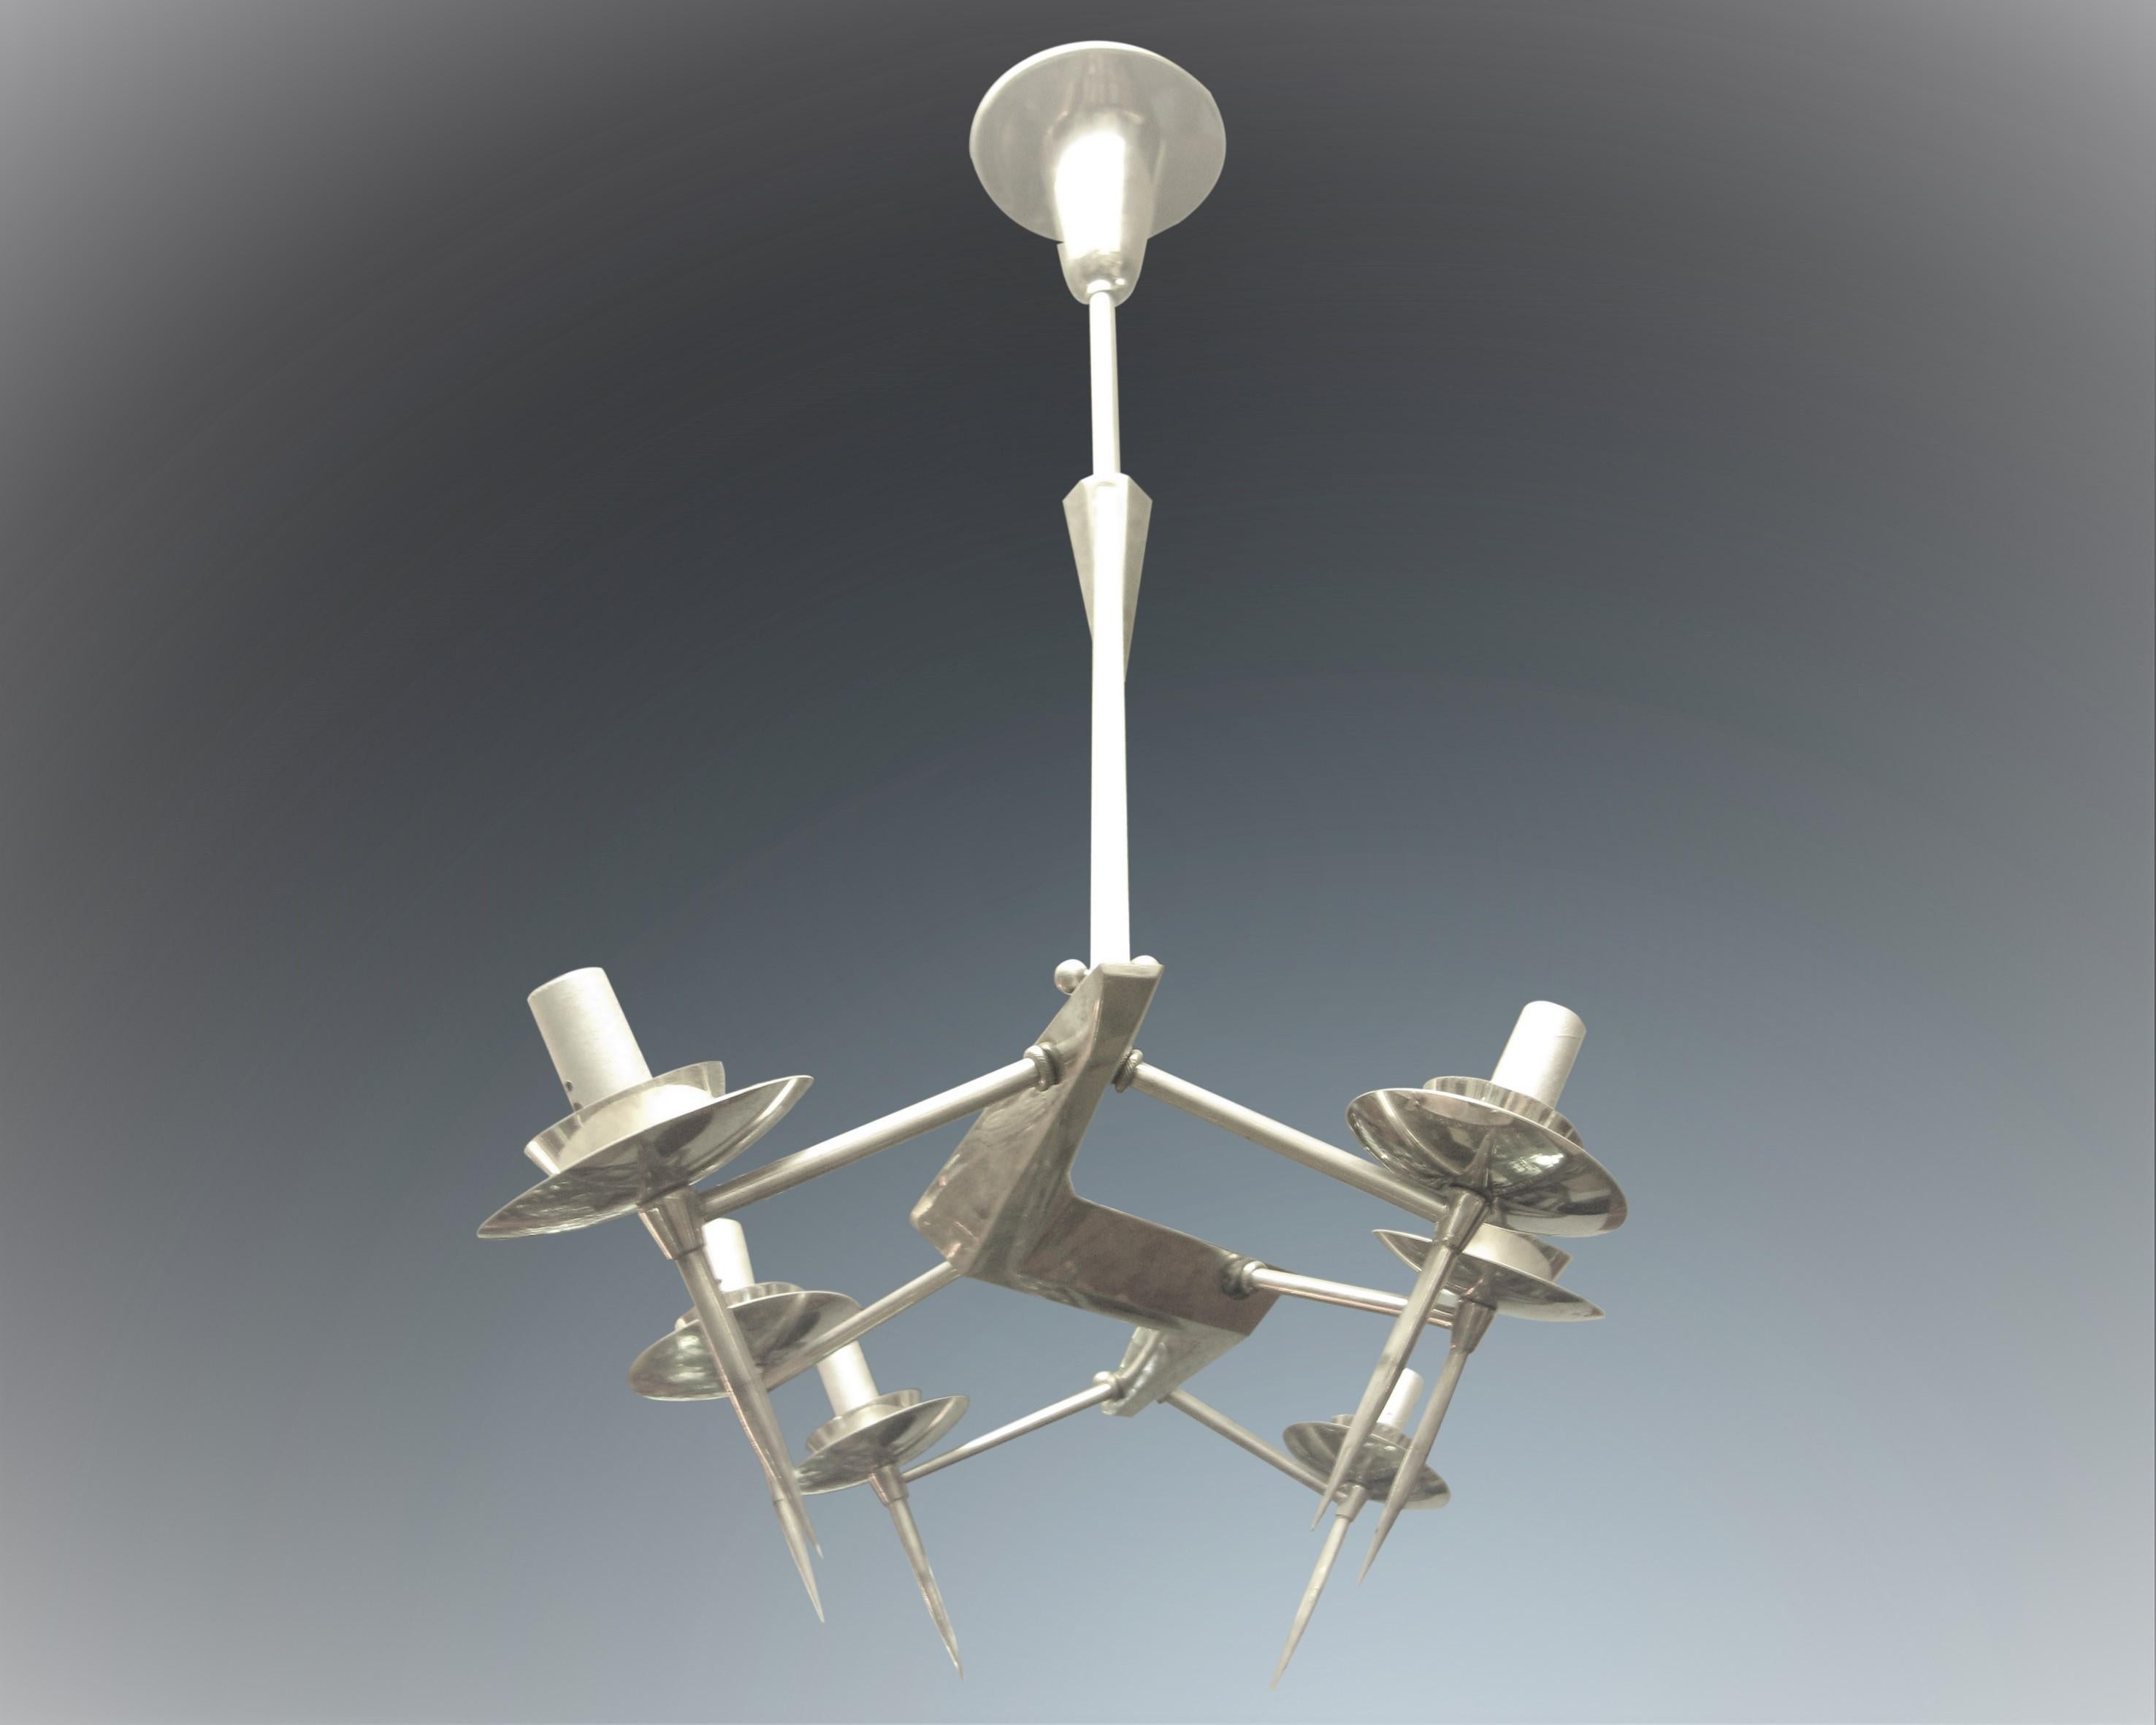 A feathery light, yet piercingly poignant polished nickel clad bronze modernist French chandelier featuring an unusual double arm triangular suspension with six lights nestled in reflecting dishes. The spokes of the chandelier, well cast, appear to